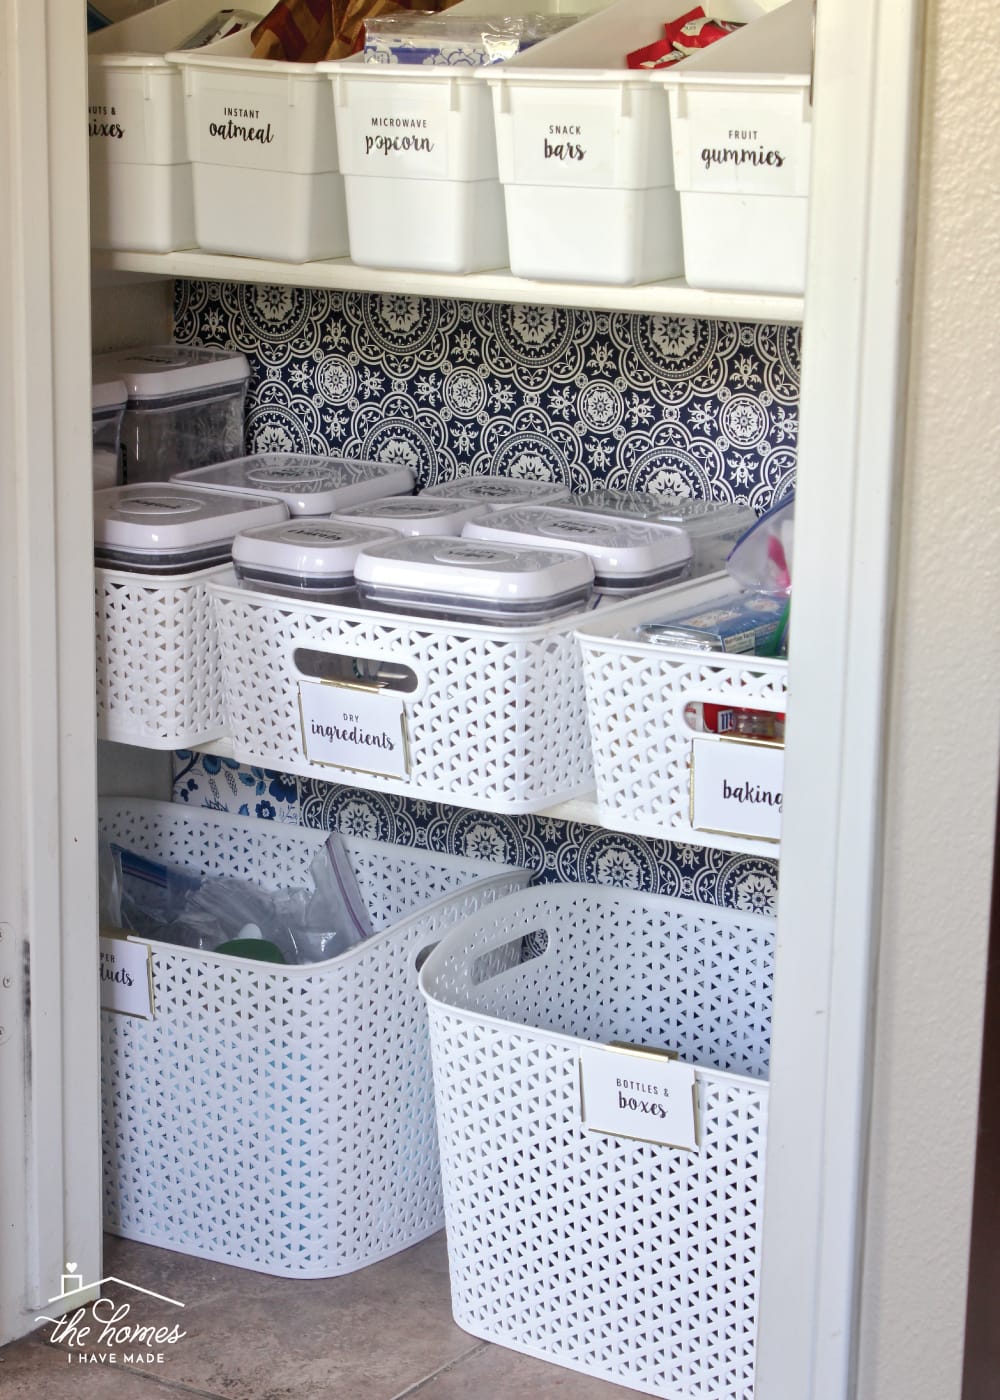 https://thehomesihavemade.com/a-tour-of-our-organized-pantry-from-top-to-bottom/a-tour-of-our-organized-pantry-from-top-to-bottom_7/